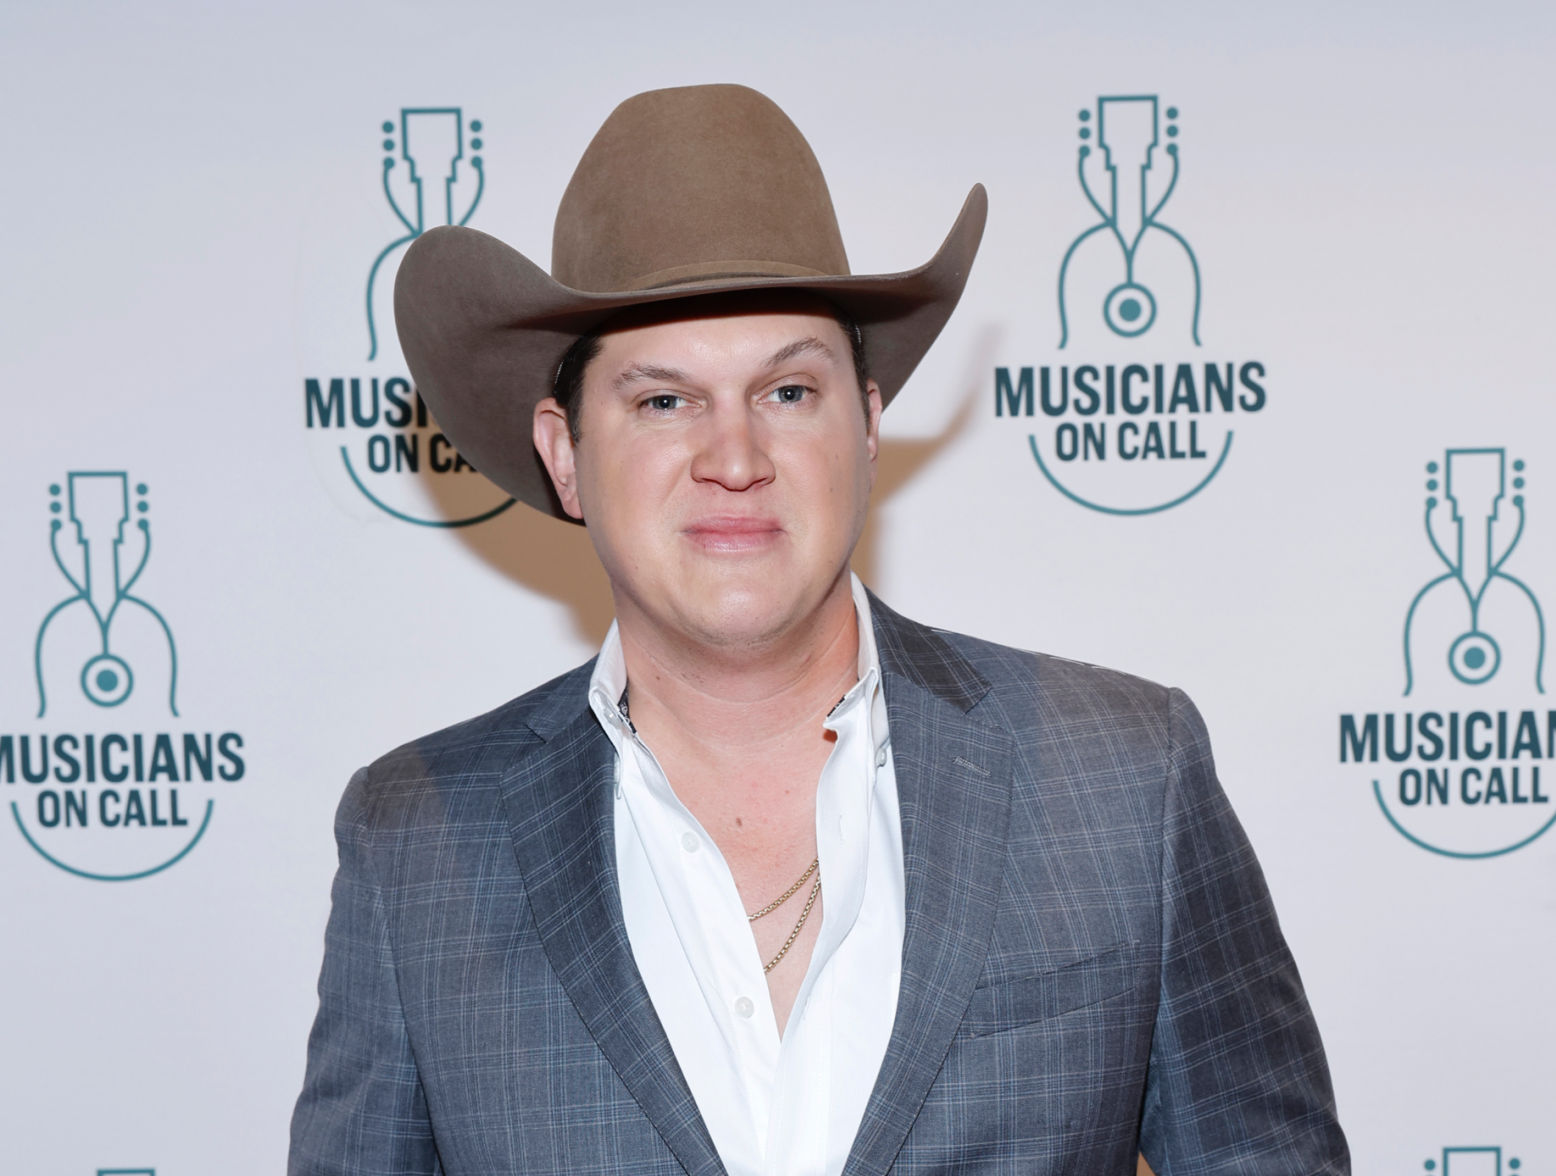 Jon Pardi - NEW DATE  Angel of the Winds Arena